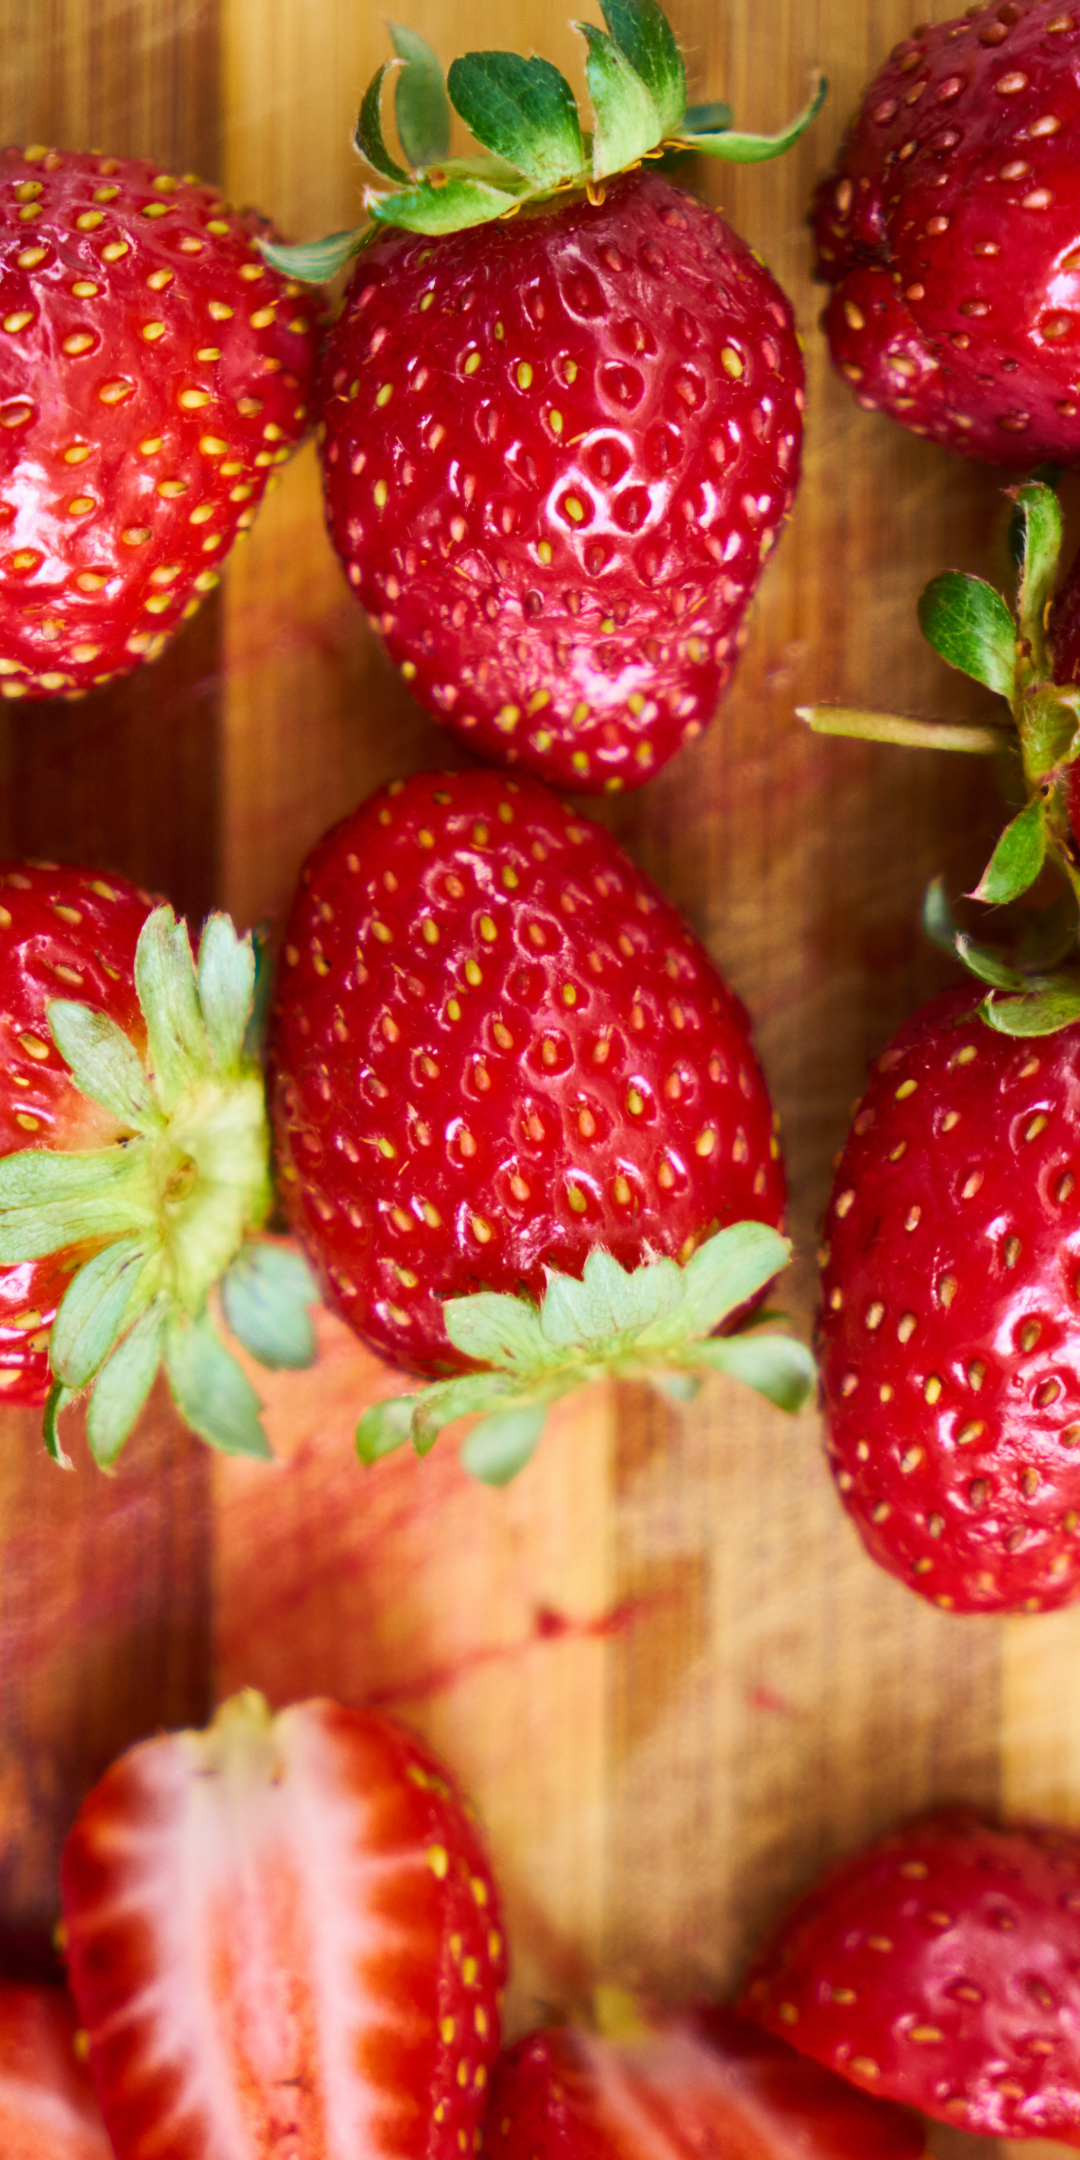 Strawberry, red fruits, slices, 1080x2160 wallpaper